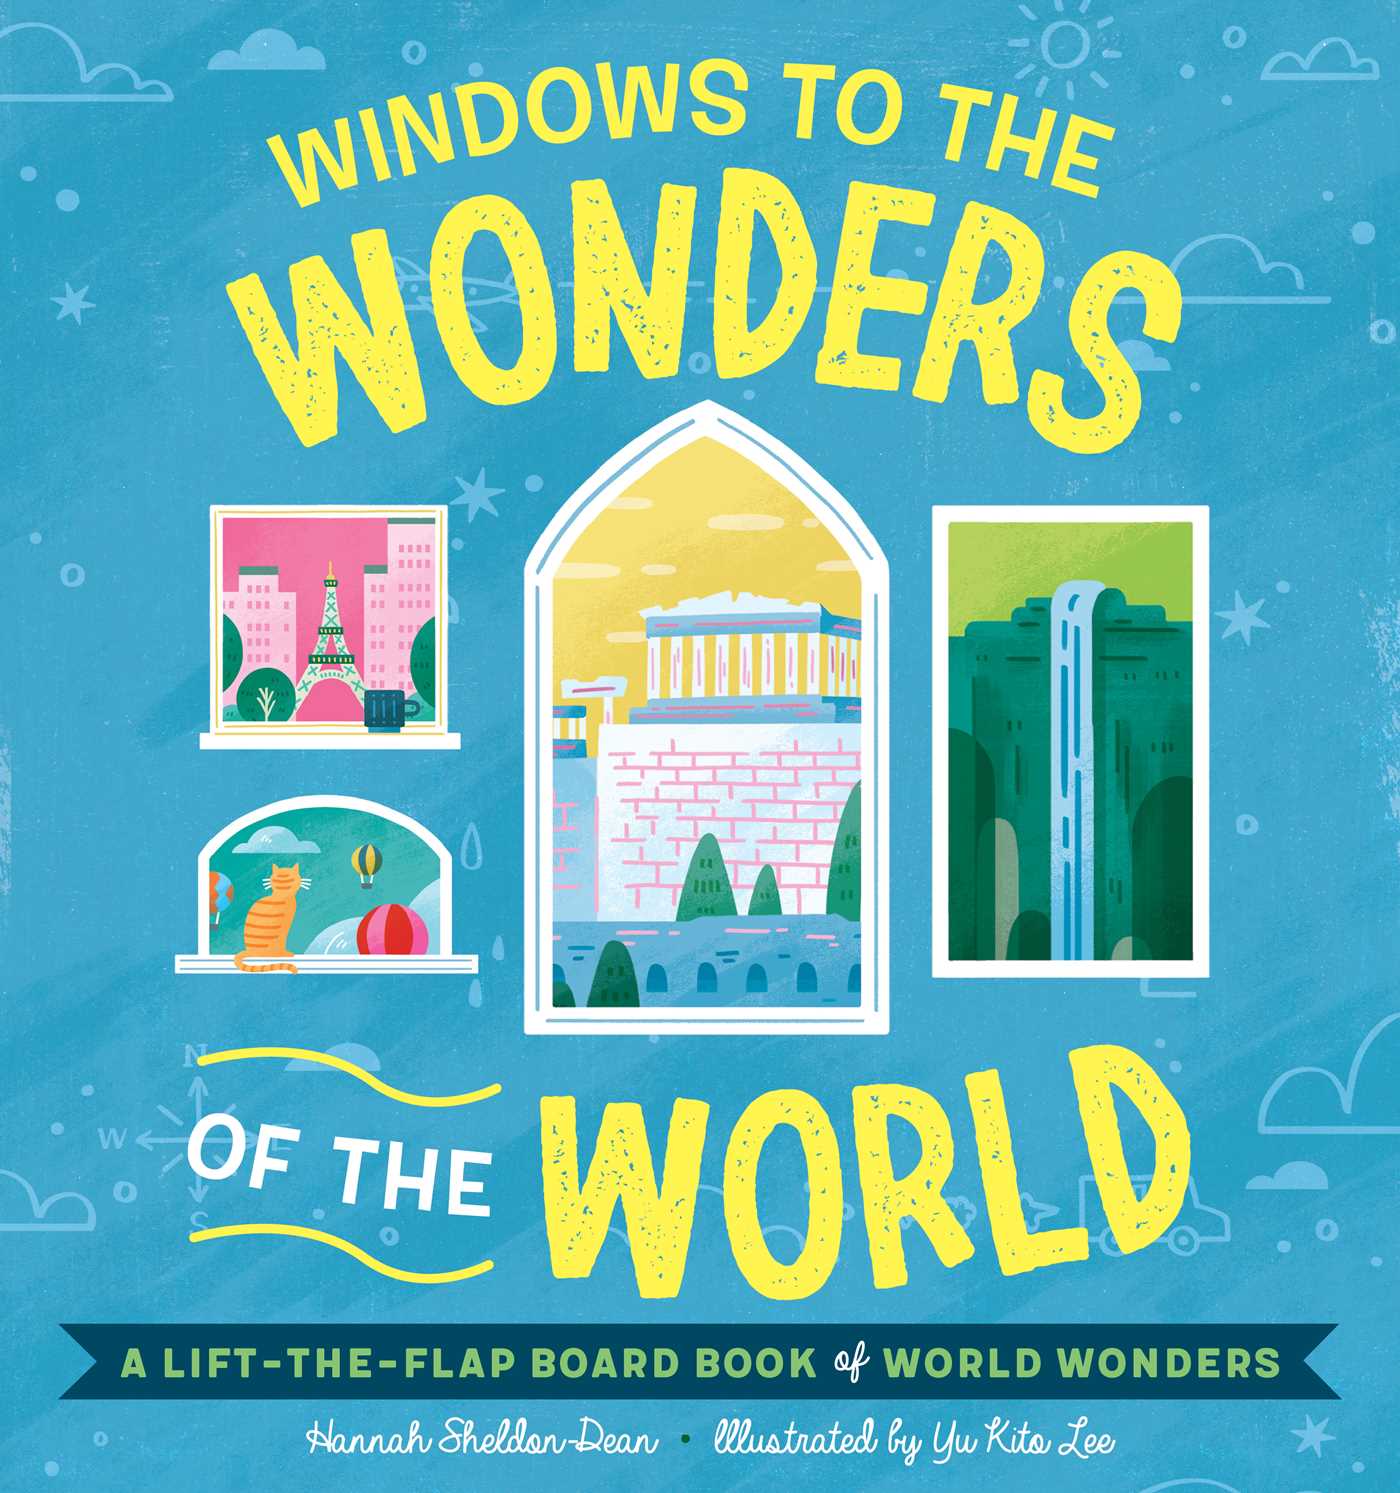 Windows to the Wonders of the World: A Lift-the-Flap Board Book of World Wonders